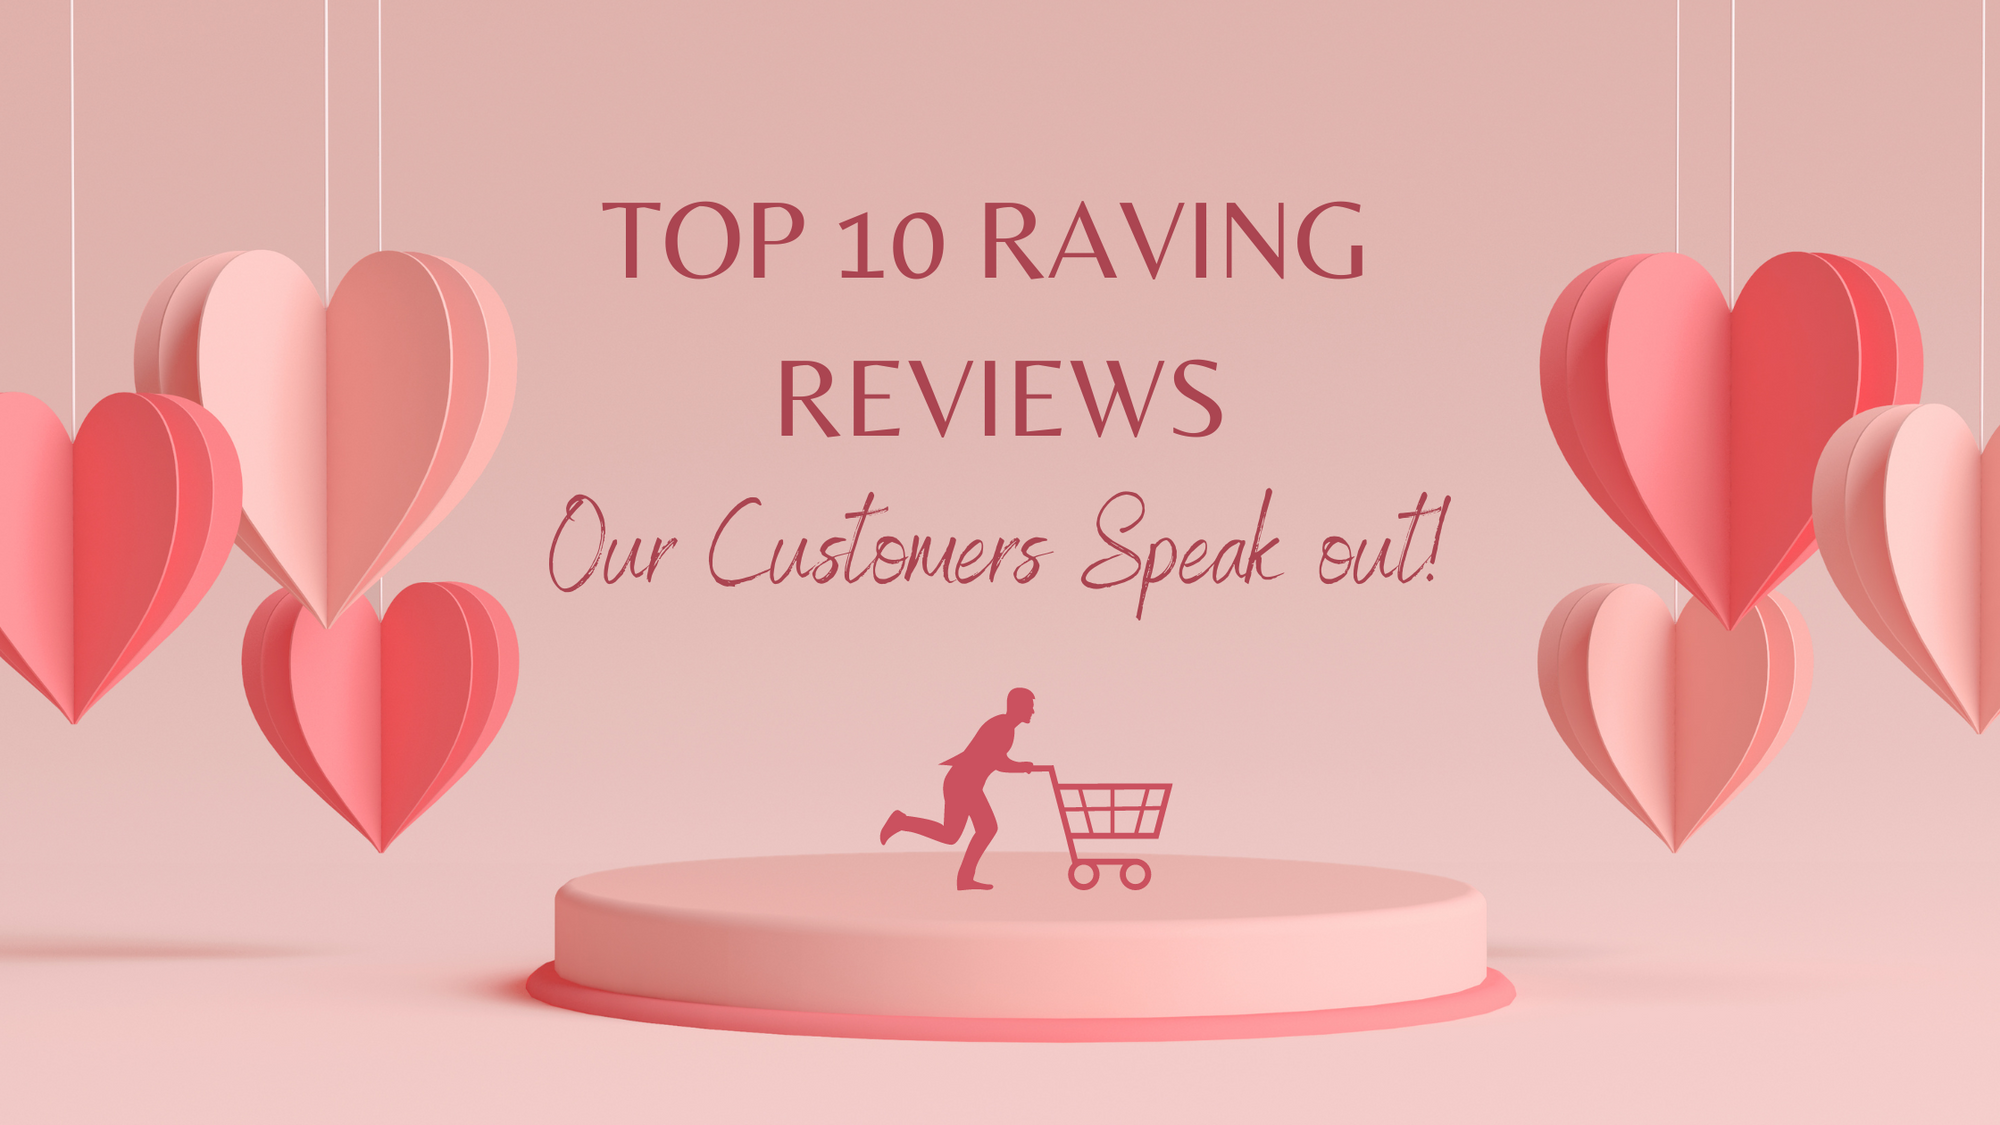 Top 10 Raving Reviews: Our Customers Speak Out! - January 27th